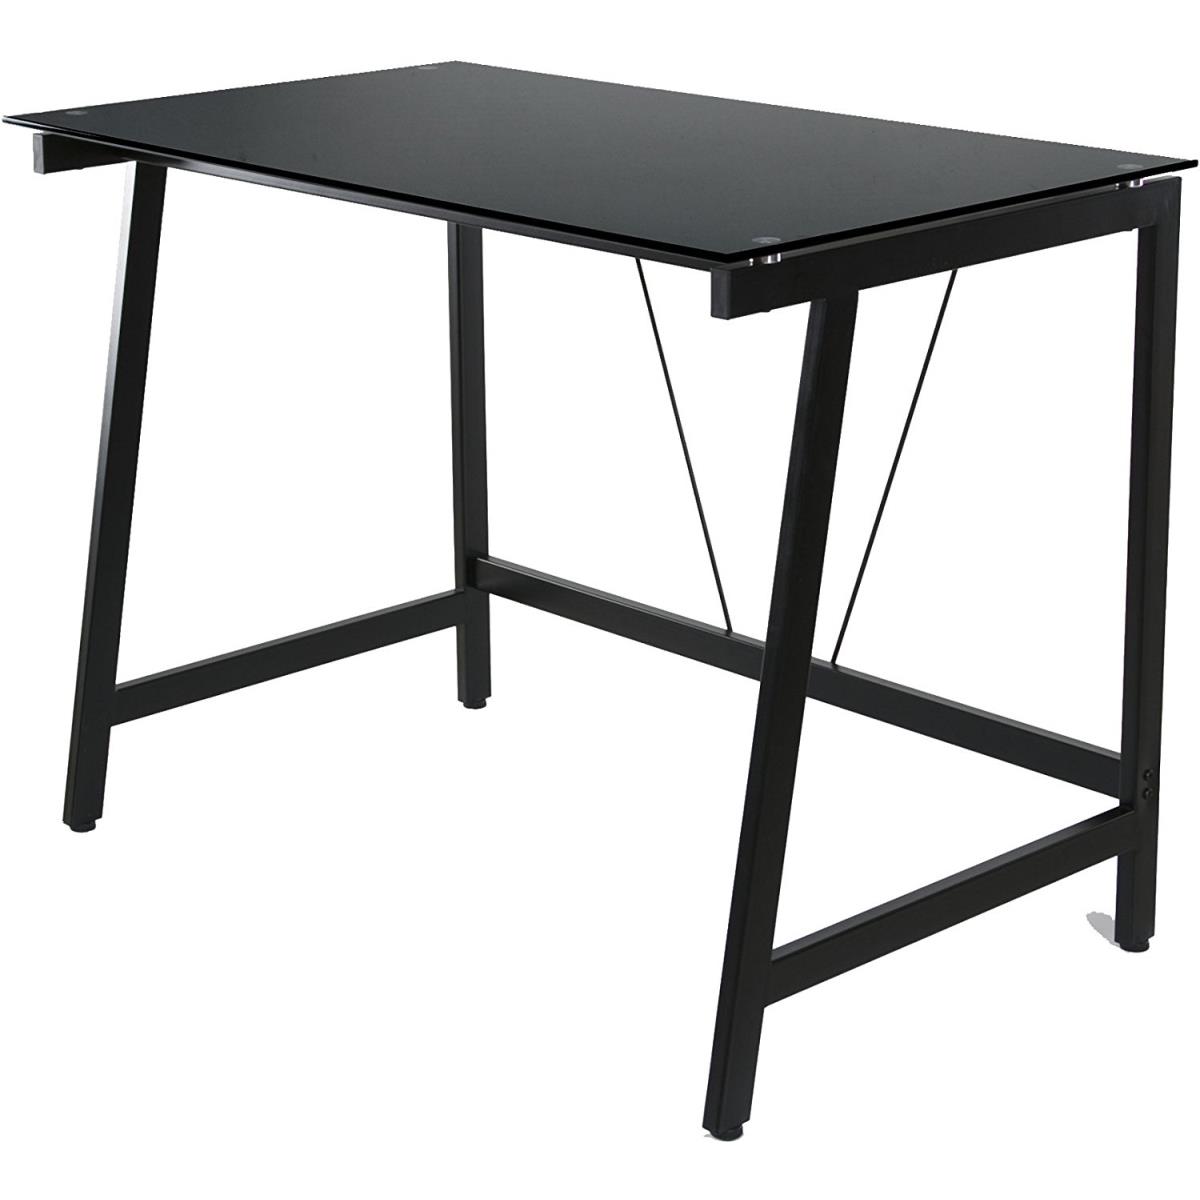 Comfort Products 50-hd0105 One Space Contemporary Glass Writing Desk, Steel Frame, Black - Pack Of 4